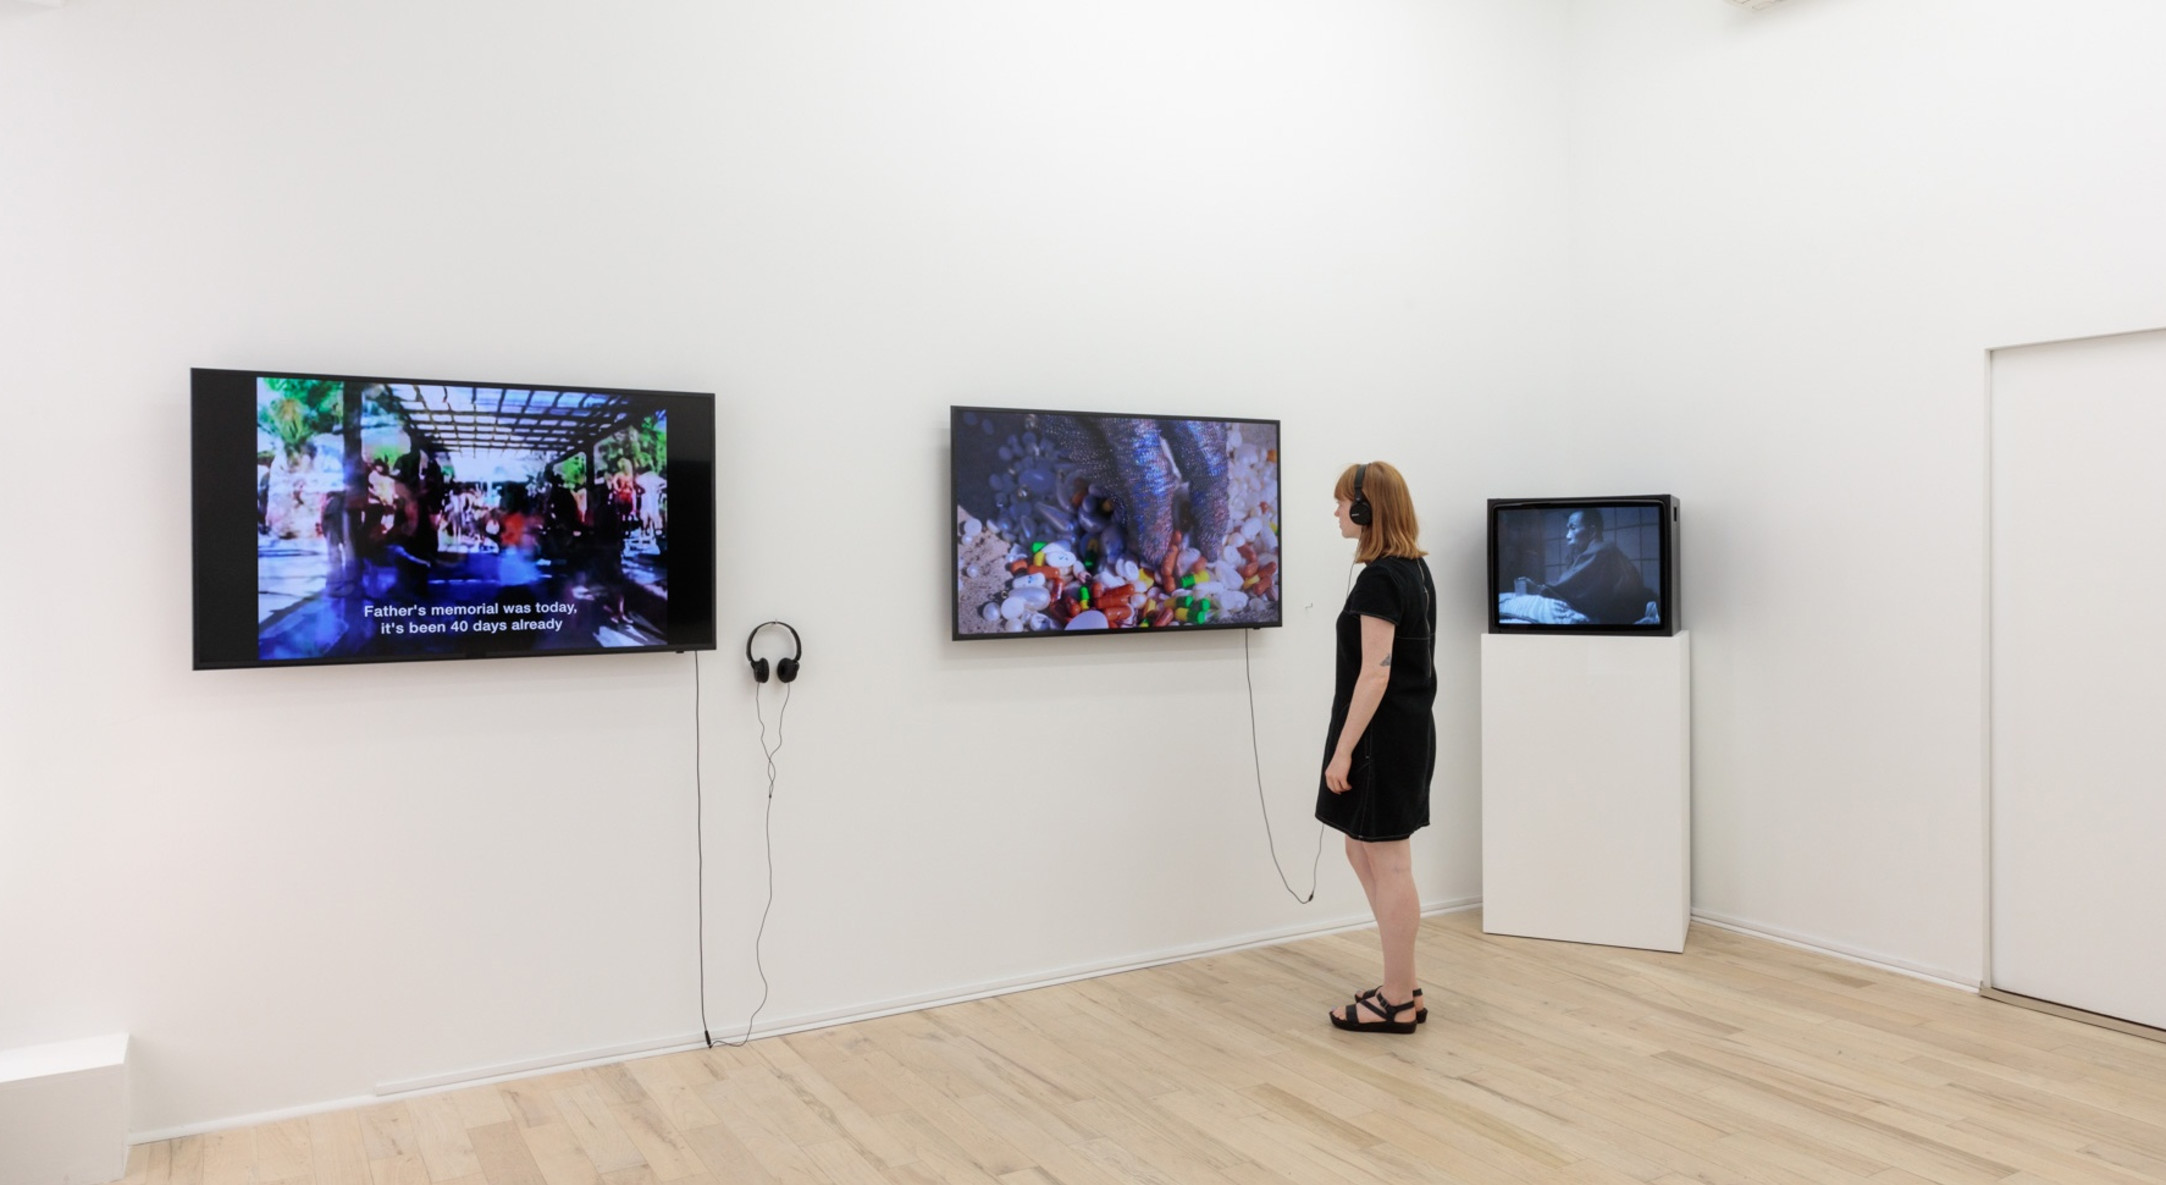 Installation view of How Does This Make You Feel?, Ja’Tovia Gary, Shigeko Kubota, Hunter Reynolds, Erica Scourti, at Hales Project Room, New York